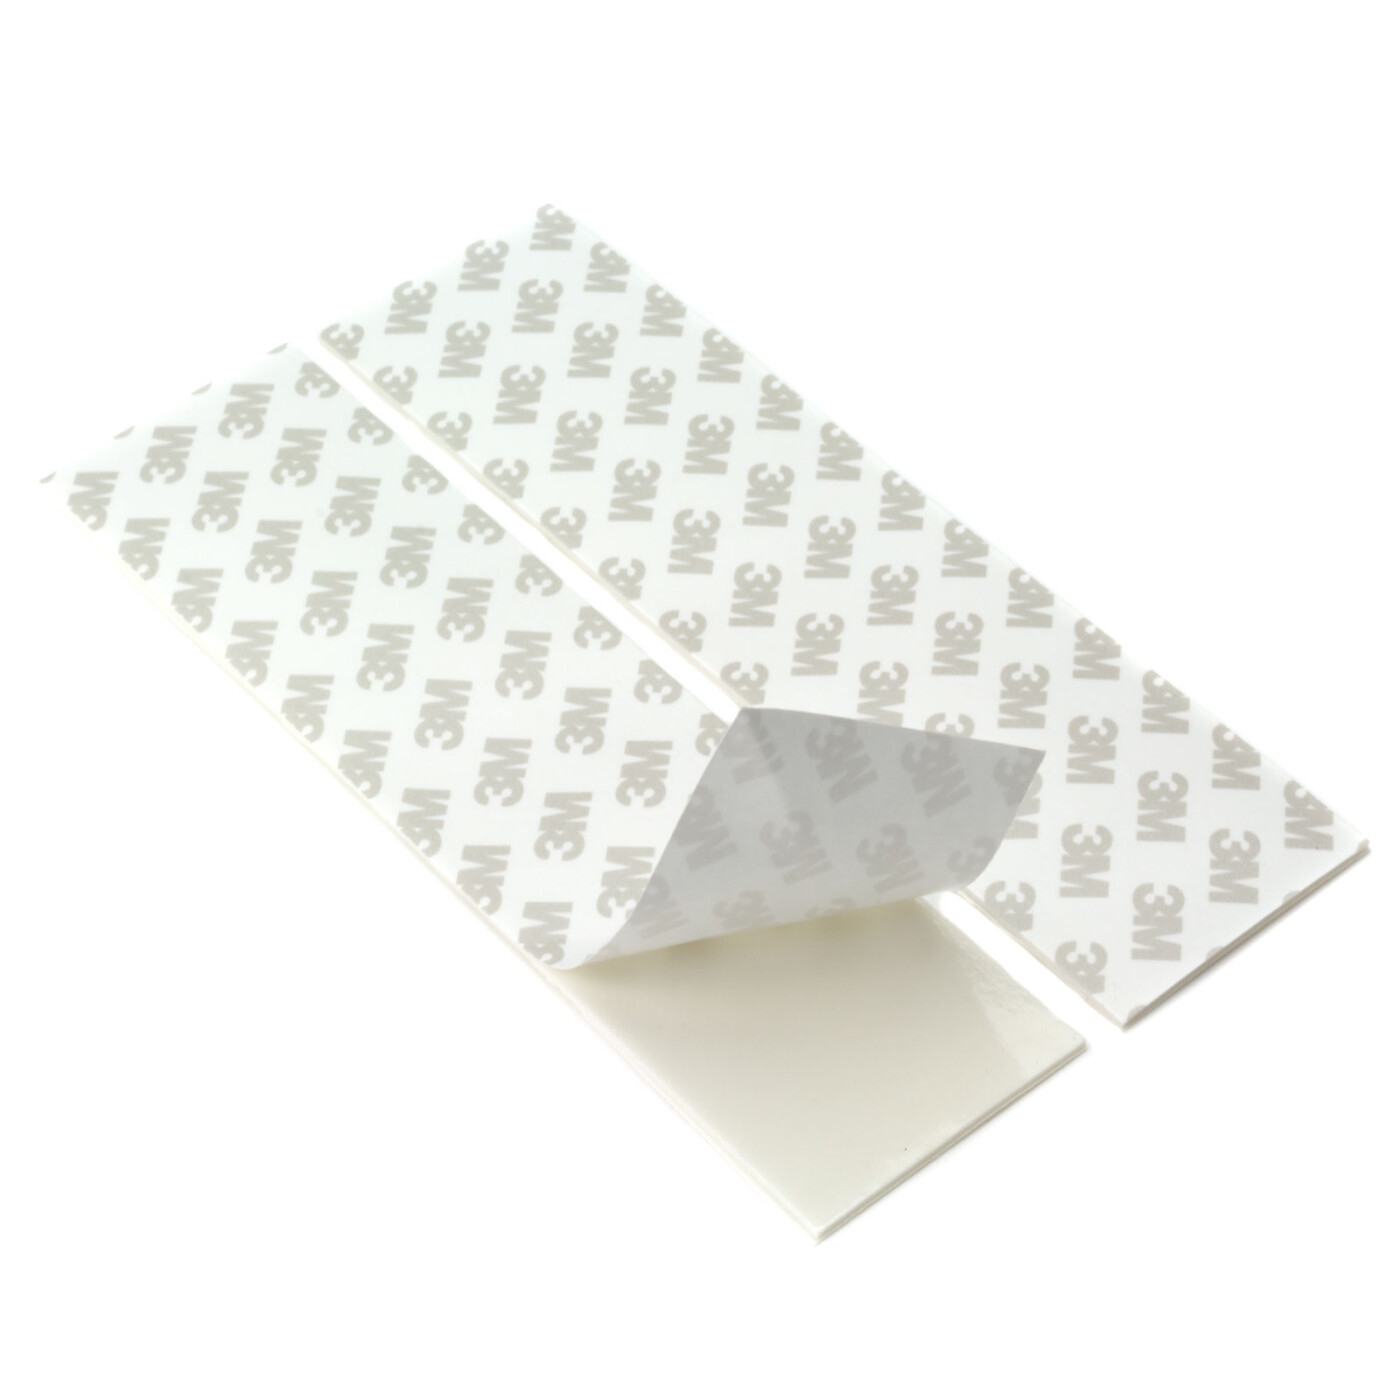 3M 4950 2x double-sided adhesive pad 50x200mm